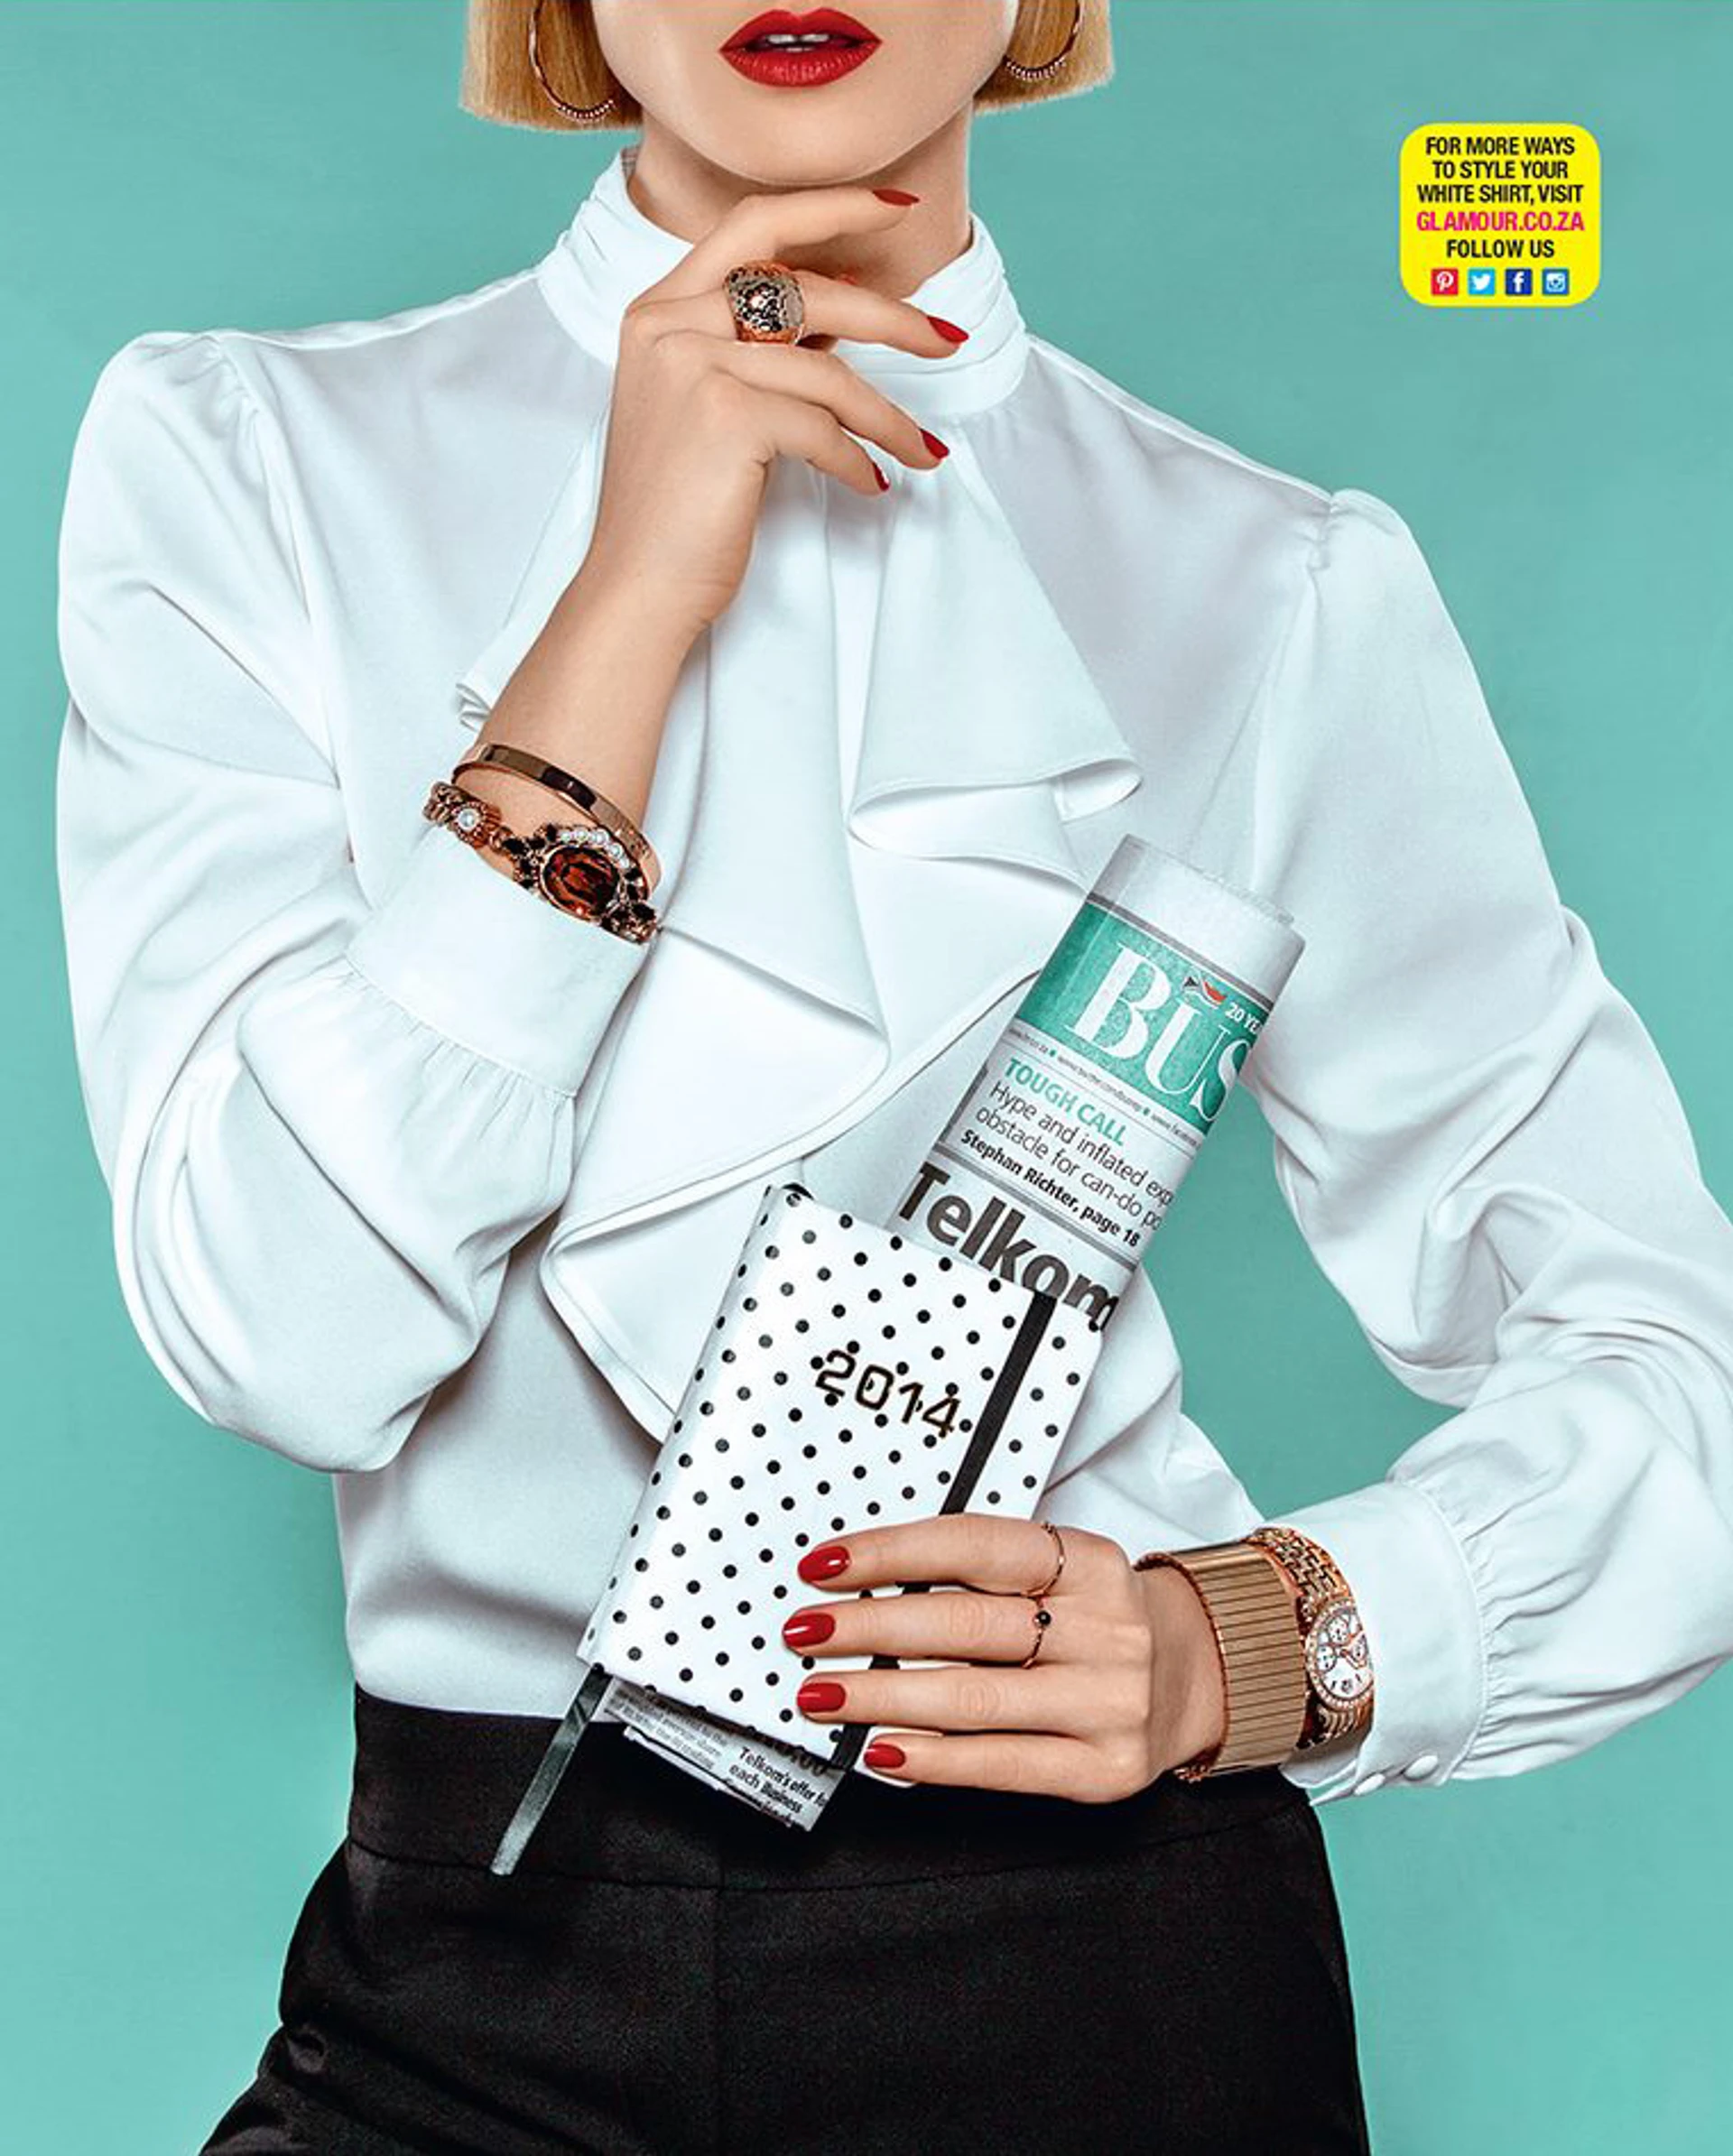 Chic woman in a white high-neck blouse, accessorized with rose gold jewelry, holding a polka-dotted 2014 planner and a magazine, set against a turquoise background.